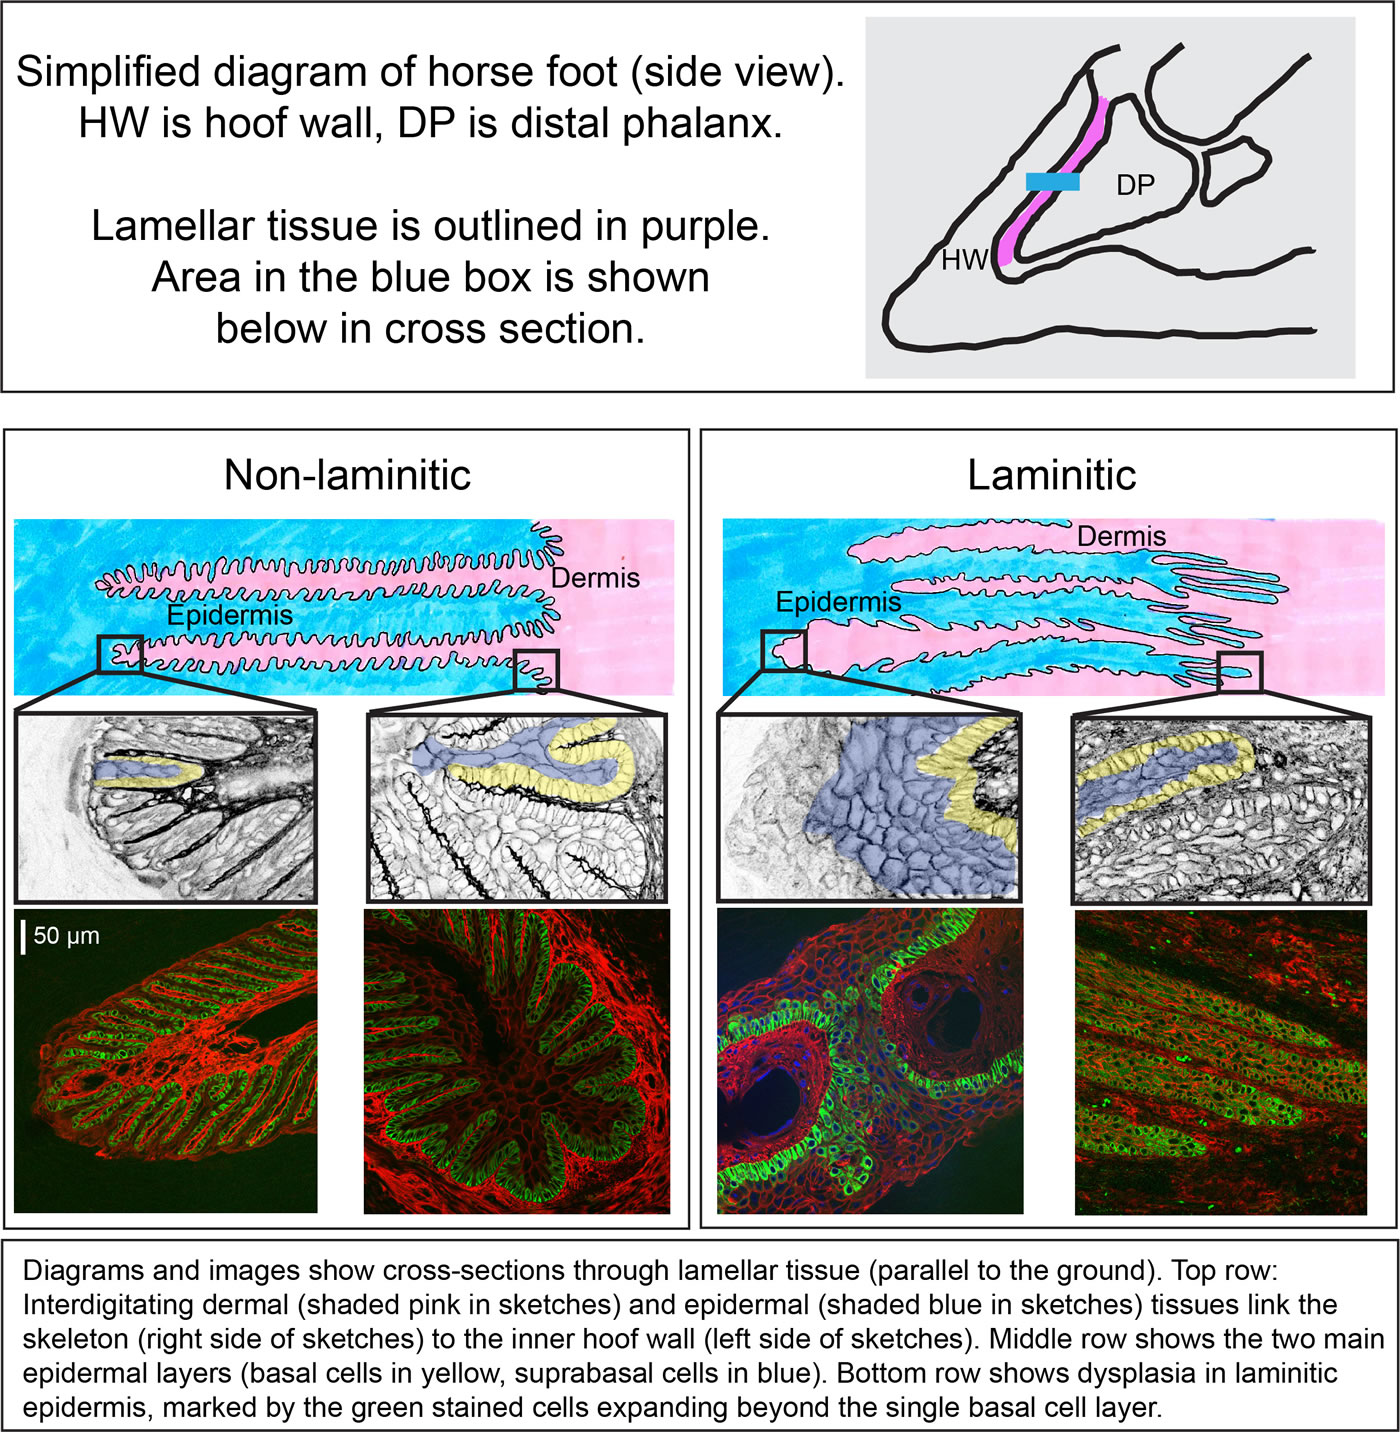 Figure (left):   Simplified diagram of horse foot (side view). HW is hoof wall, DP is distal phalanx. Lamellar tissue is outlined in purple. Area in blue box shown below in cross section.
Figure (right): Diagrams and images show cross-sections through lamellar tissue (parallel to the ground). 
Top row:  Interdigitating dermal (shaded pink in sketches) and epidermal (shaded blue in sketches) tissues link the skeleton (right side of sketches) to the inner hoof wall (left side of sketches). Middle row shows the two main epidermal layers (basal cells in pink, suprabasal cells in blue). Bottom row shows dysplasia in laminitic epidermis, marked by the green stained cells expanding beyond the single basal cell layer.